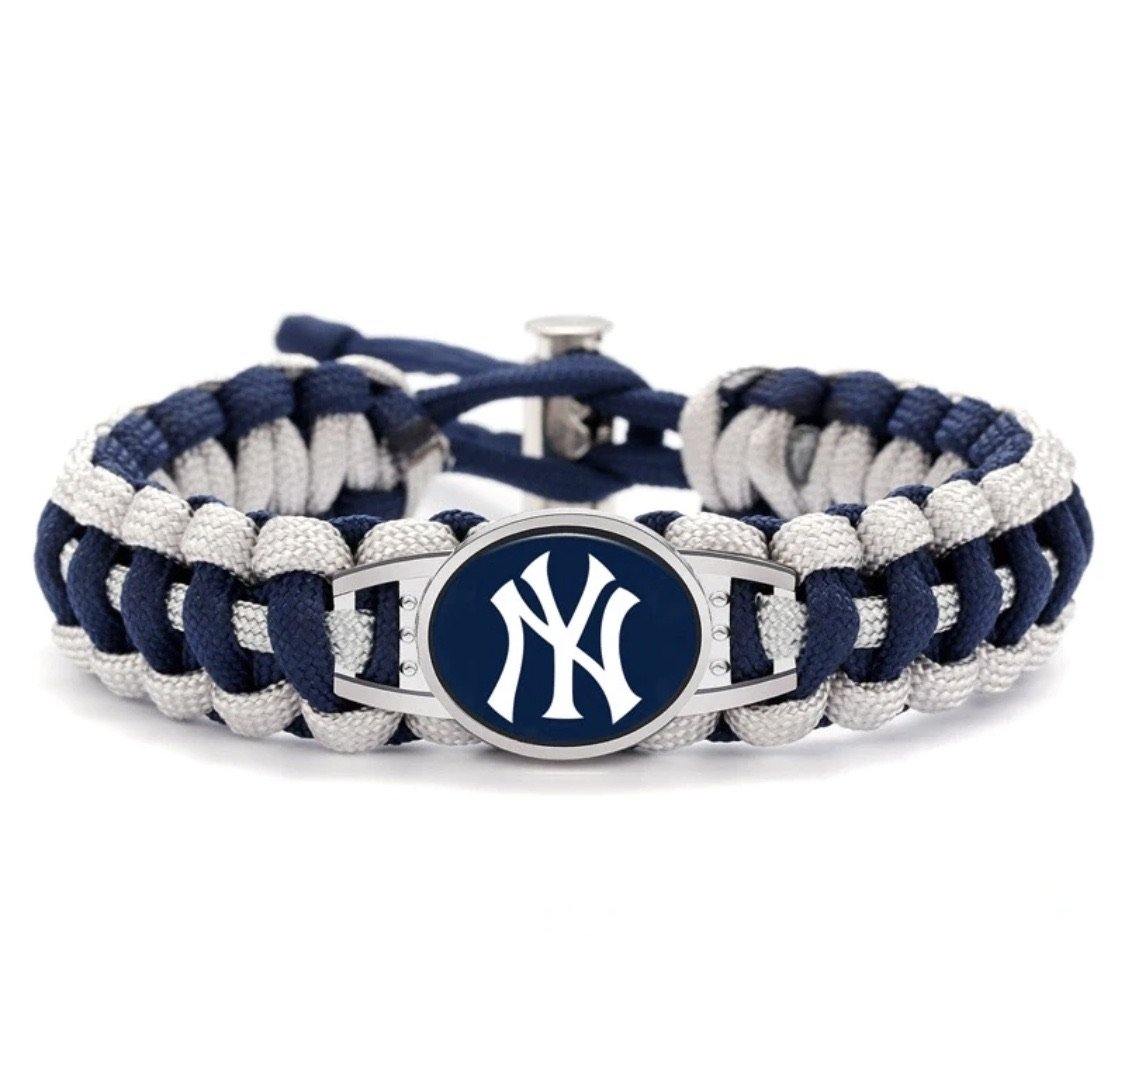 Bracelet { New York Yankees } Paracord. Blue. White. Buckle clasp. Unisex. - Stacy's Pink Martini Boutique